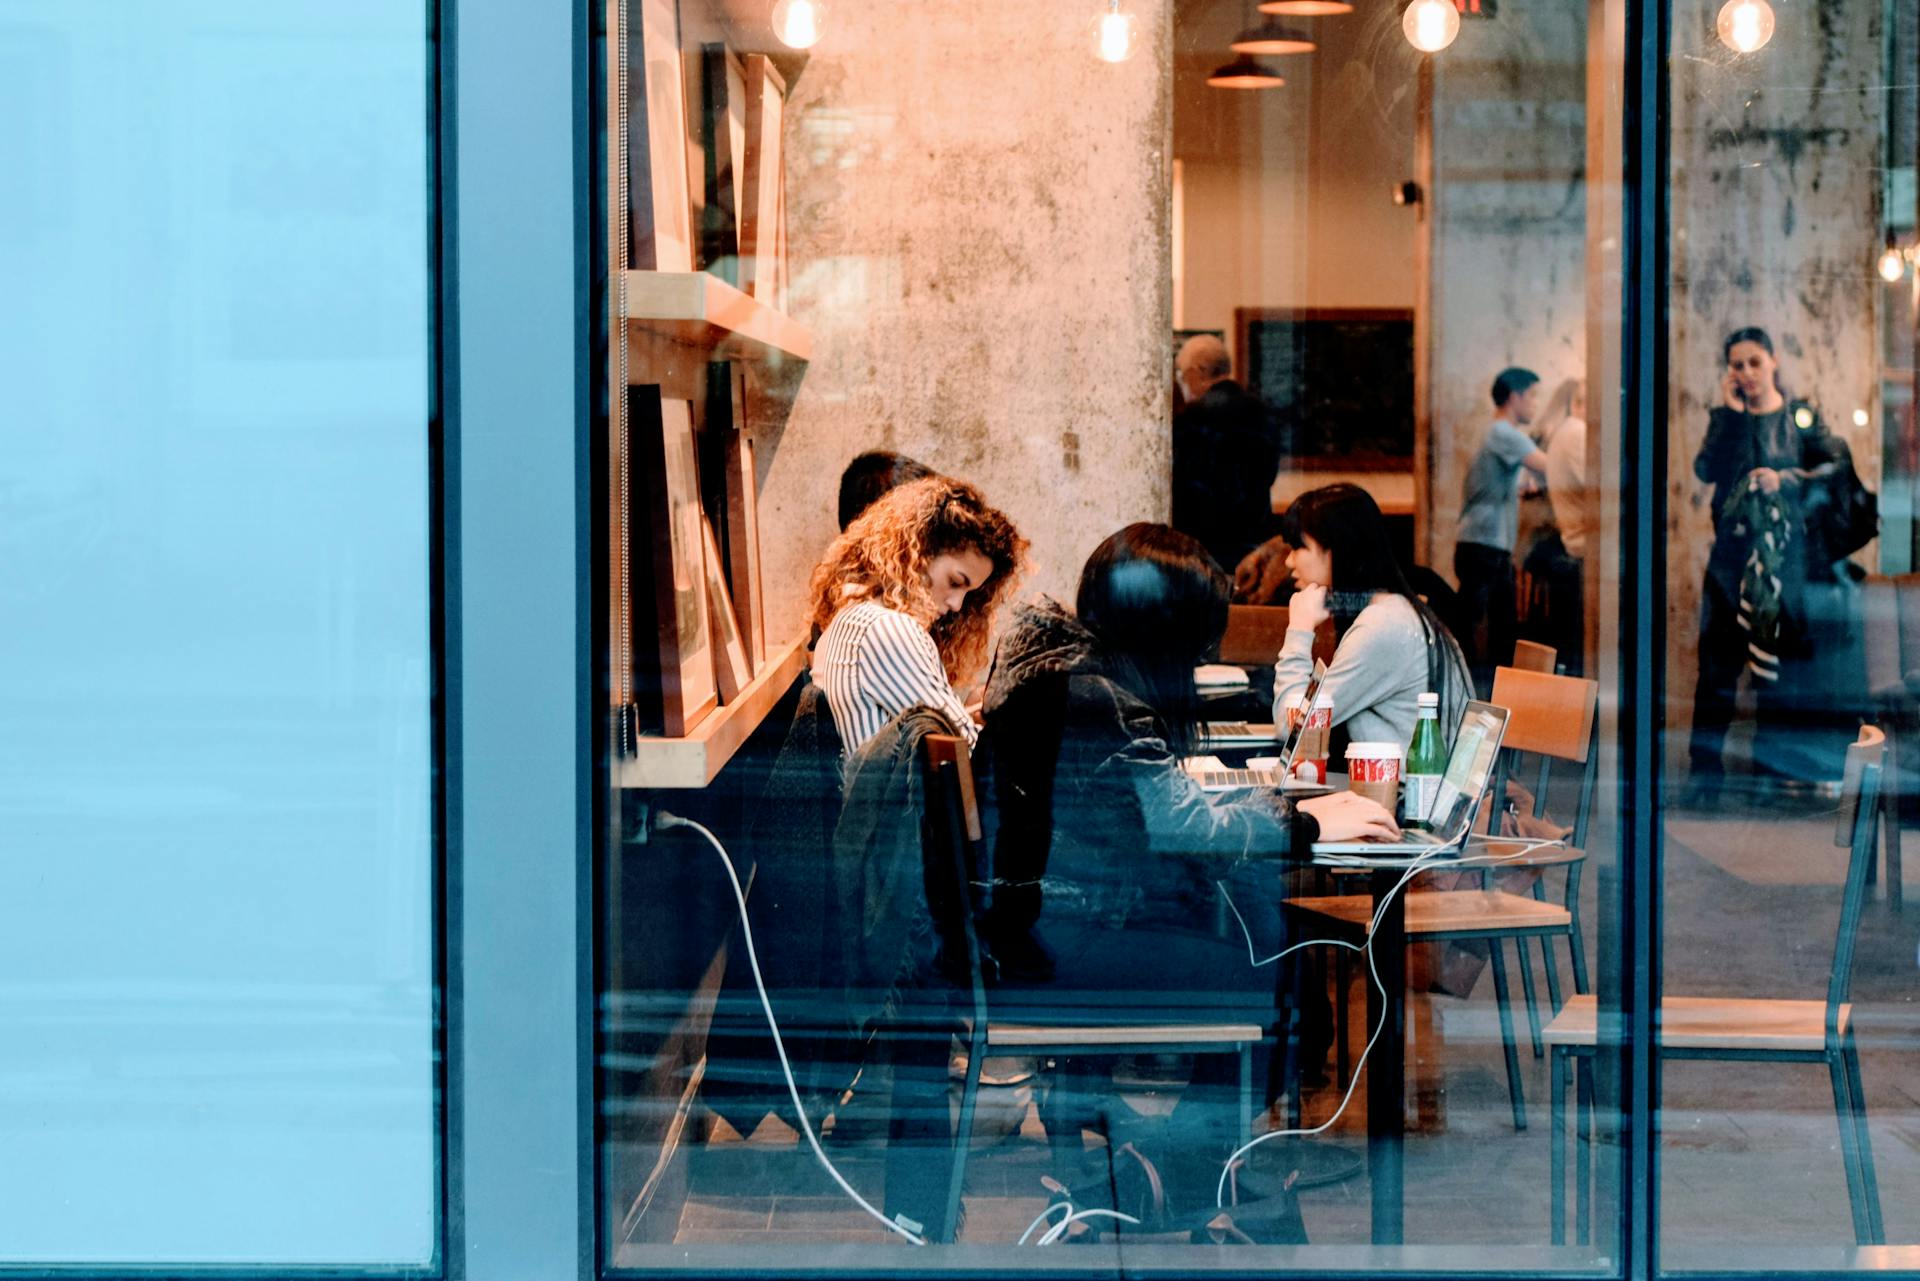 Women sitting in a cafe | Source: Pexels